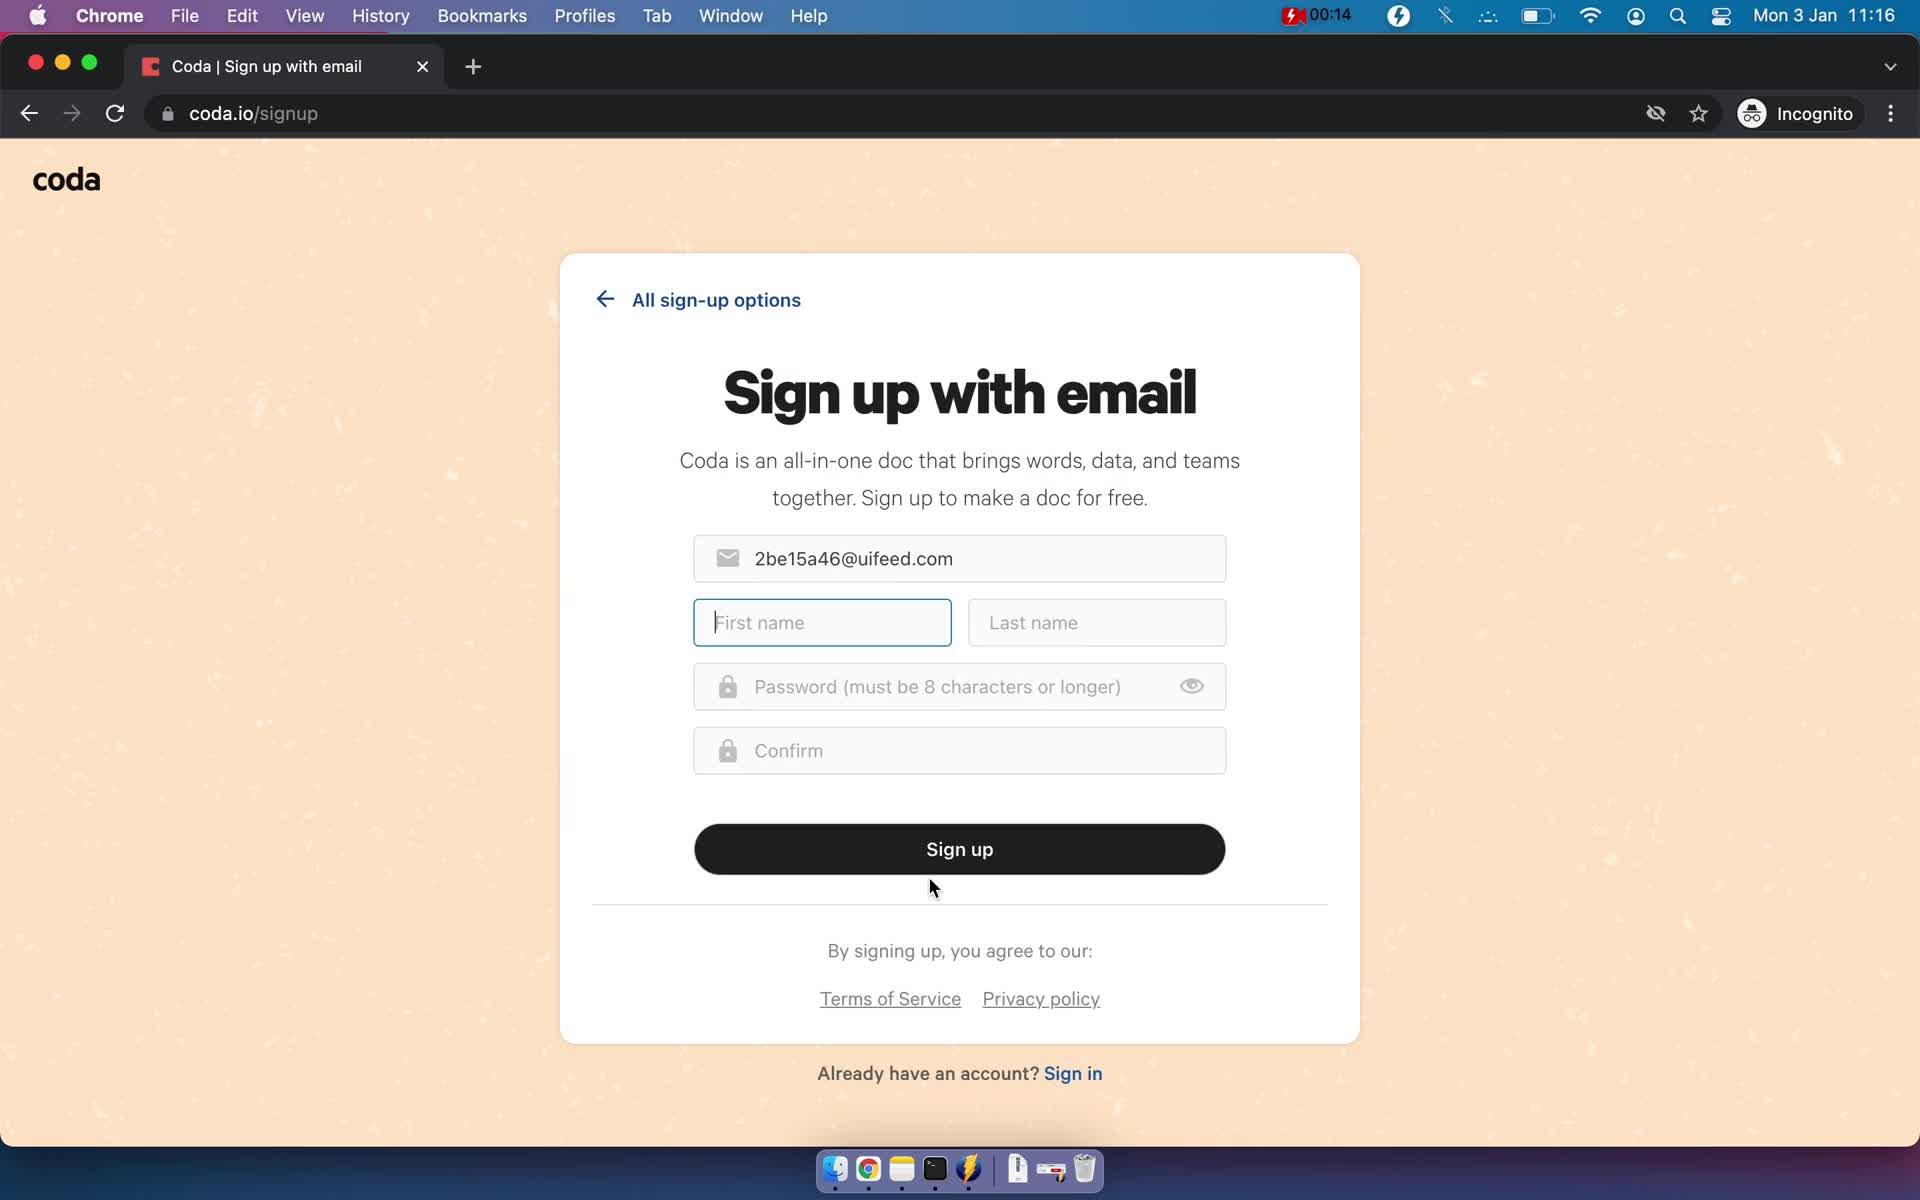 Screenshot of Sign up with email during Onboarding on Coda user flow